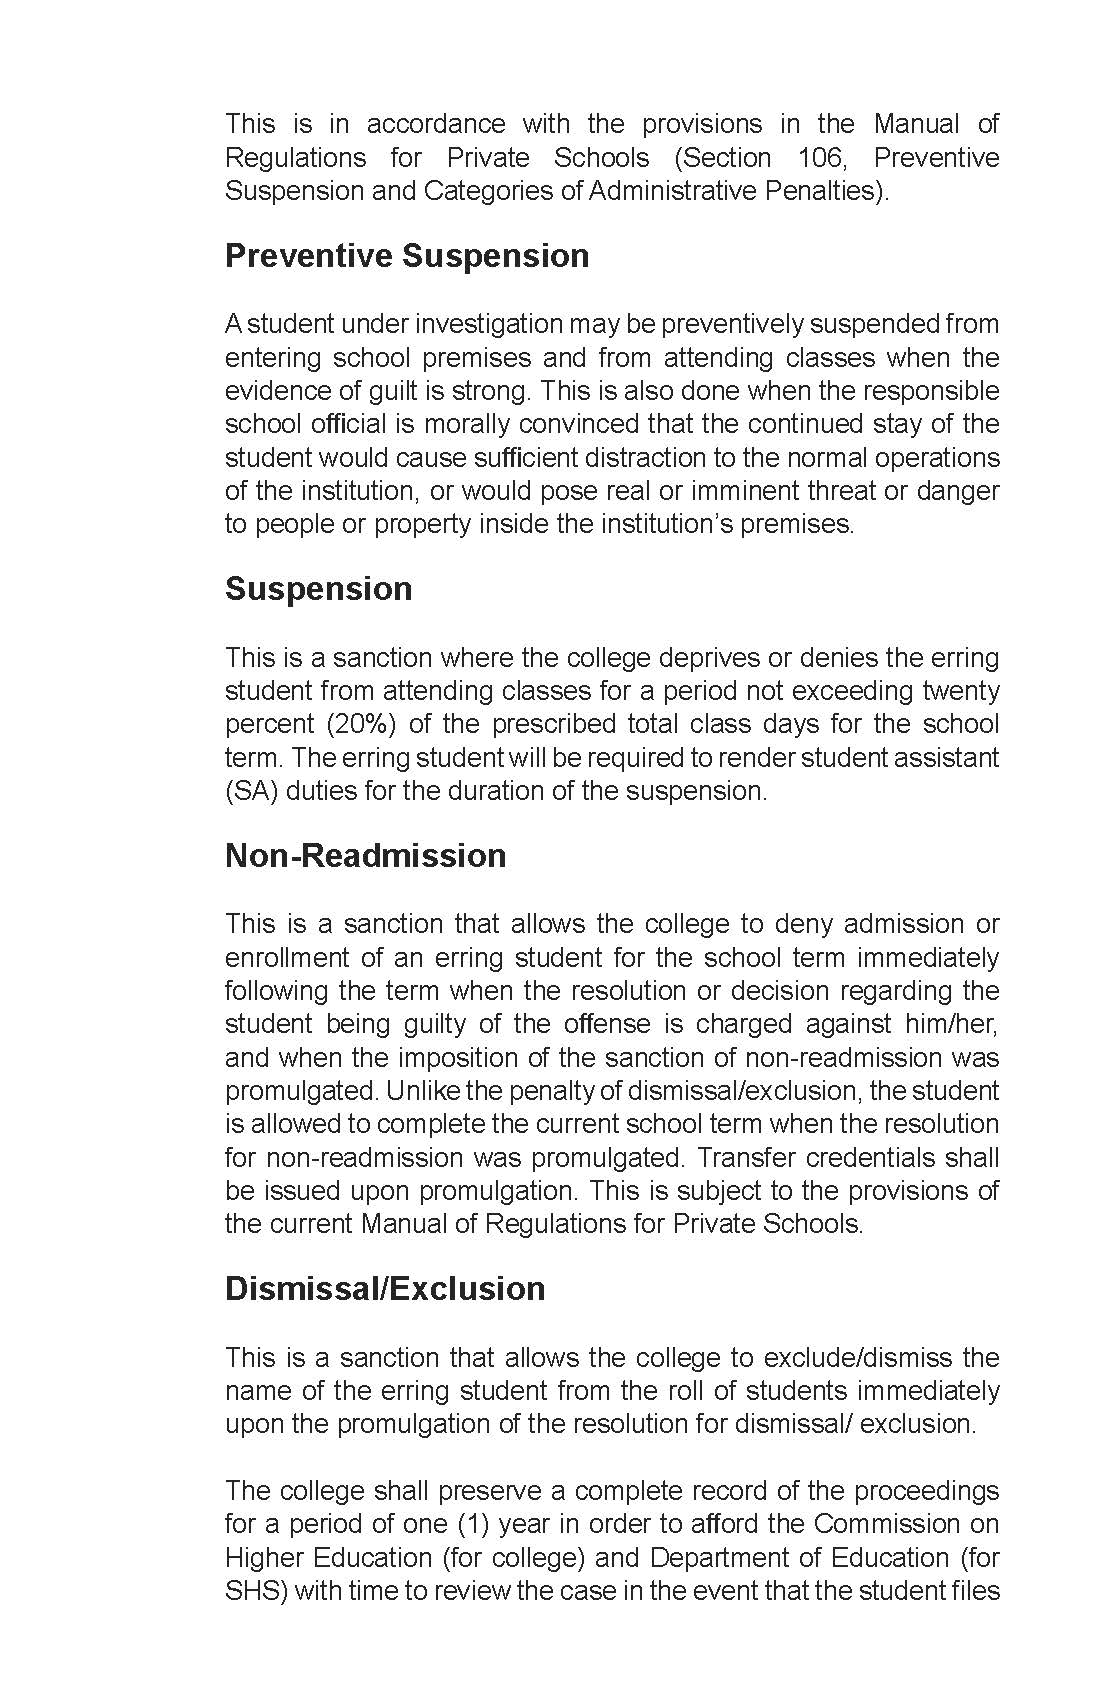 APC Policies, Rules, and Regulations Playbook_Page_31